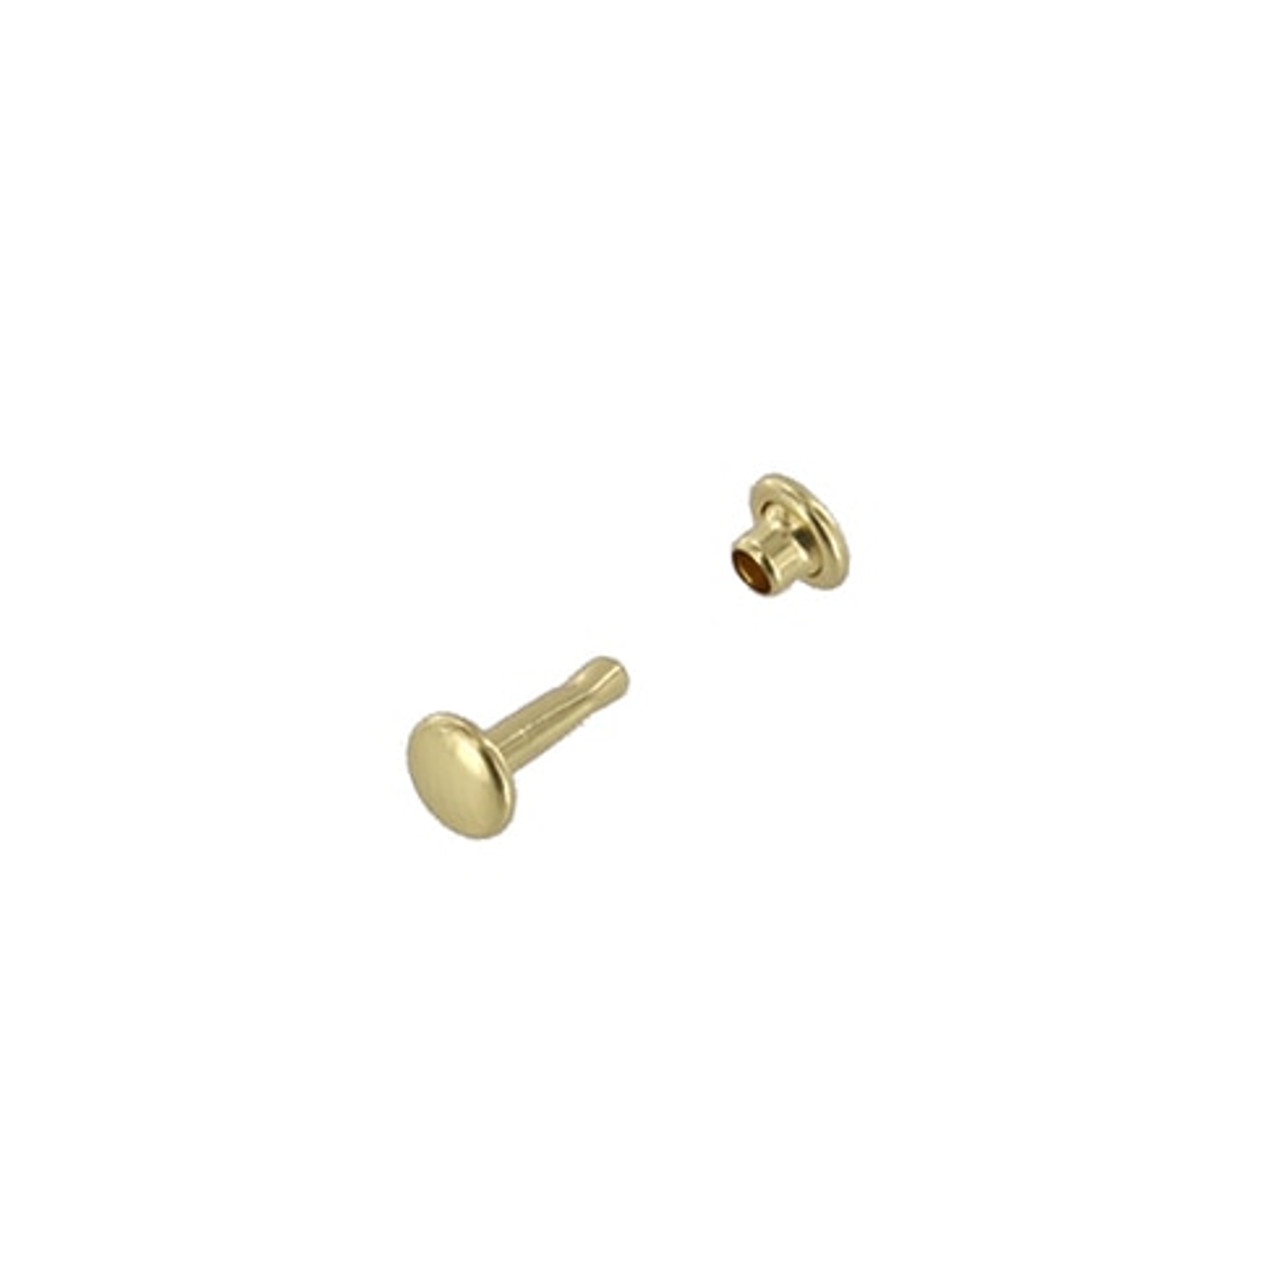 Small Single Cap Rivets Brass Plated pkg of 100 - Leathersmith